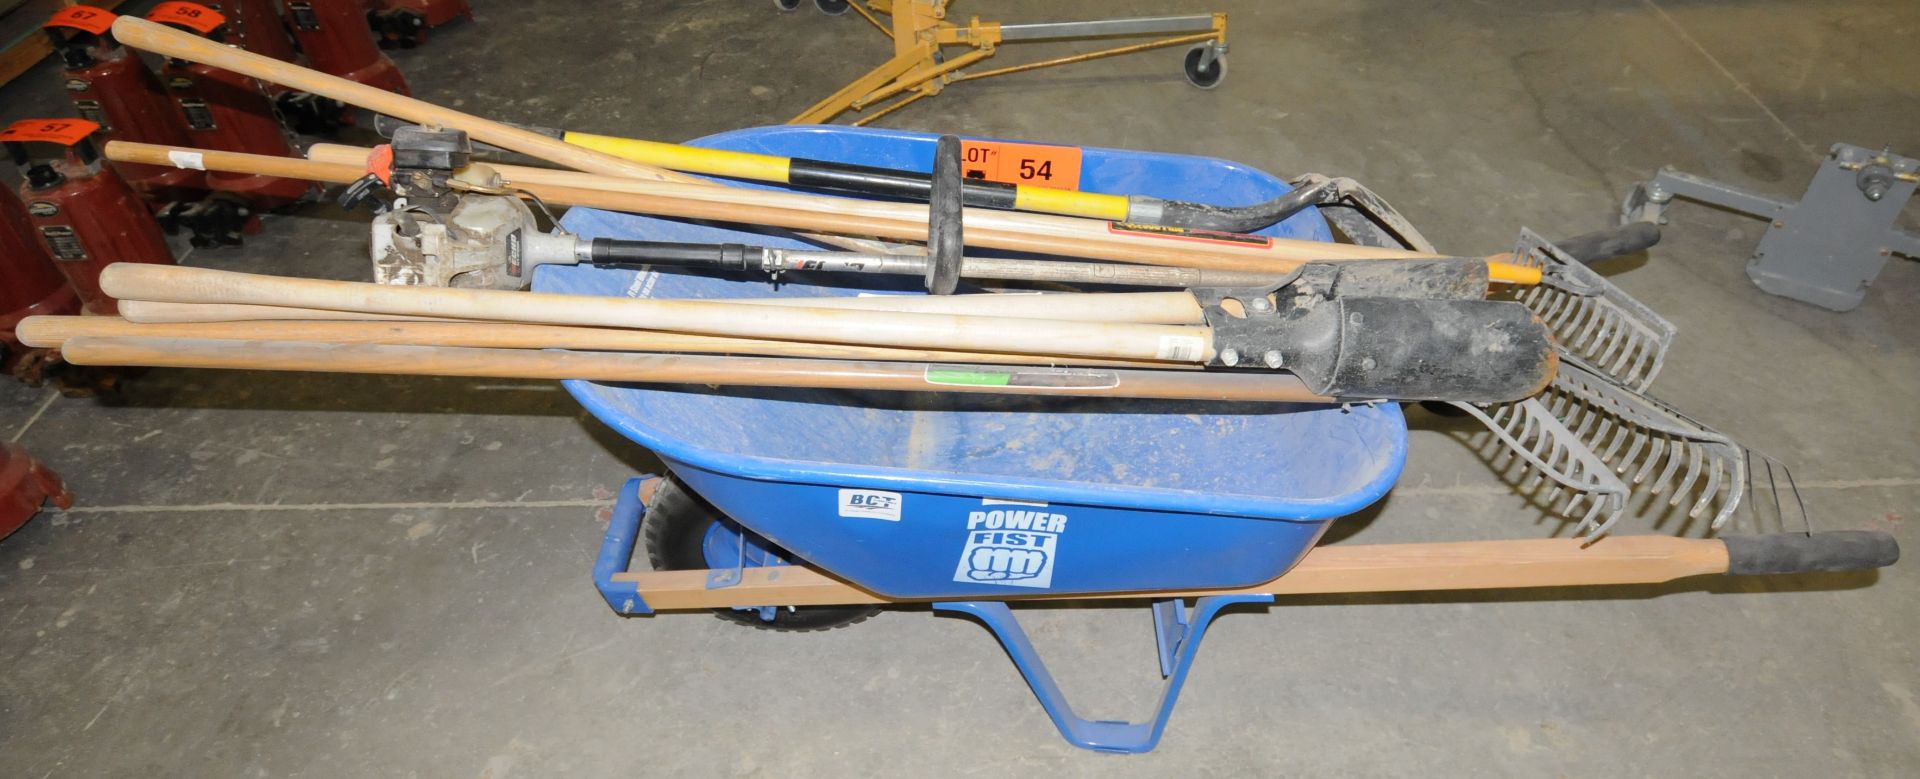 LOT/ WHEELBARROW WITH LANDSCAPING SUPPLIES